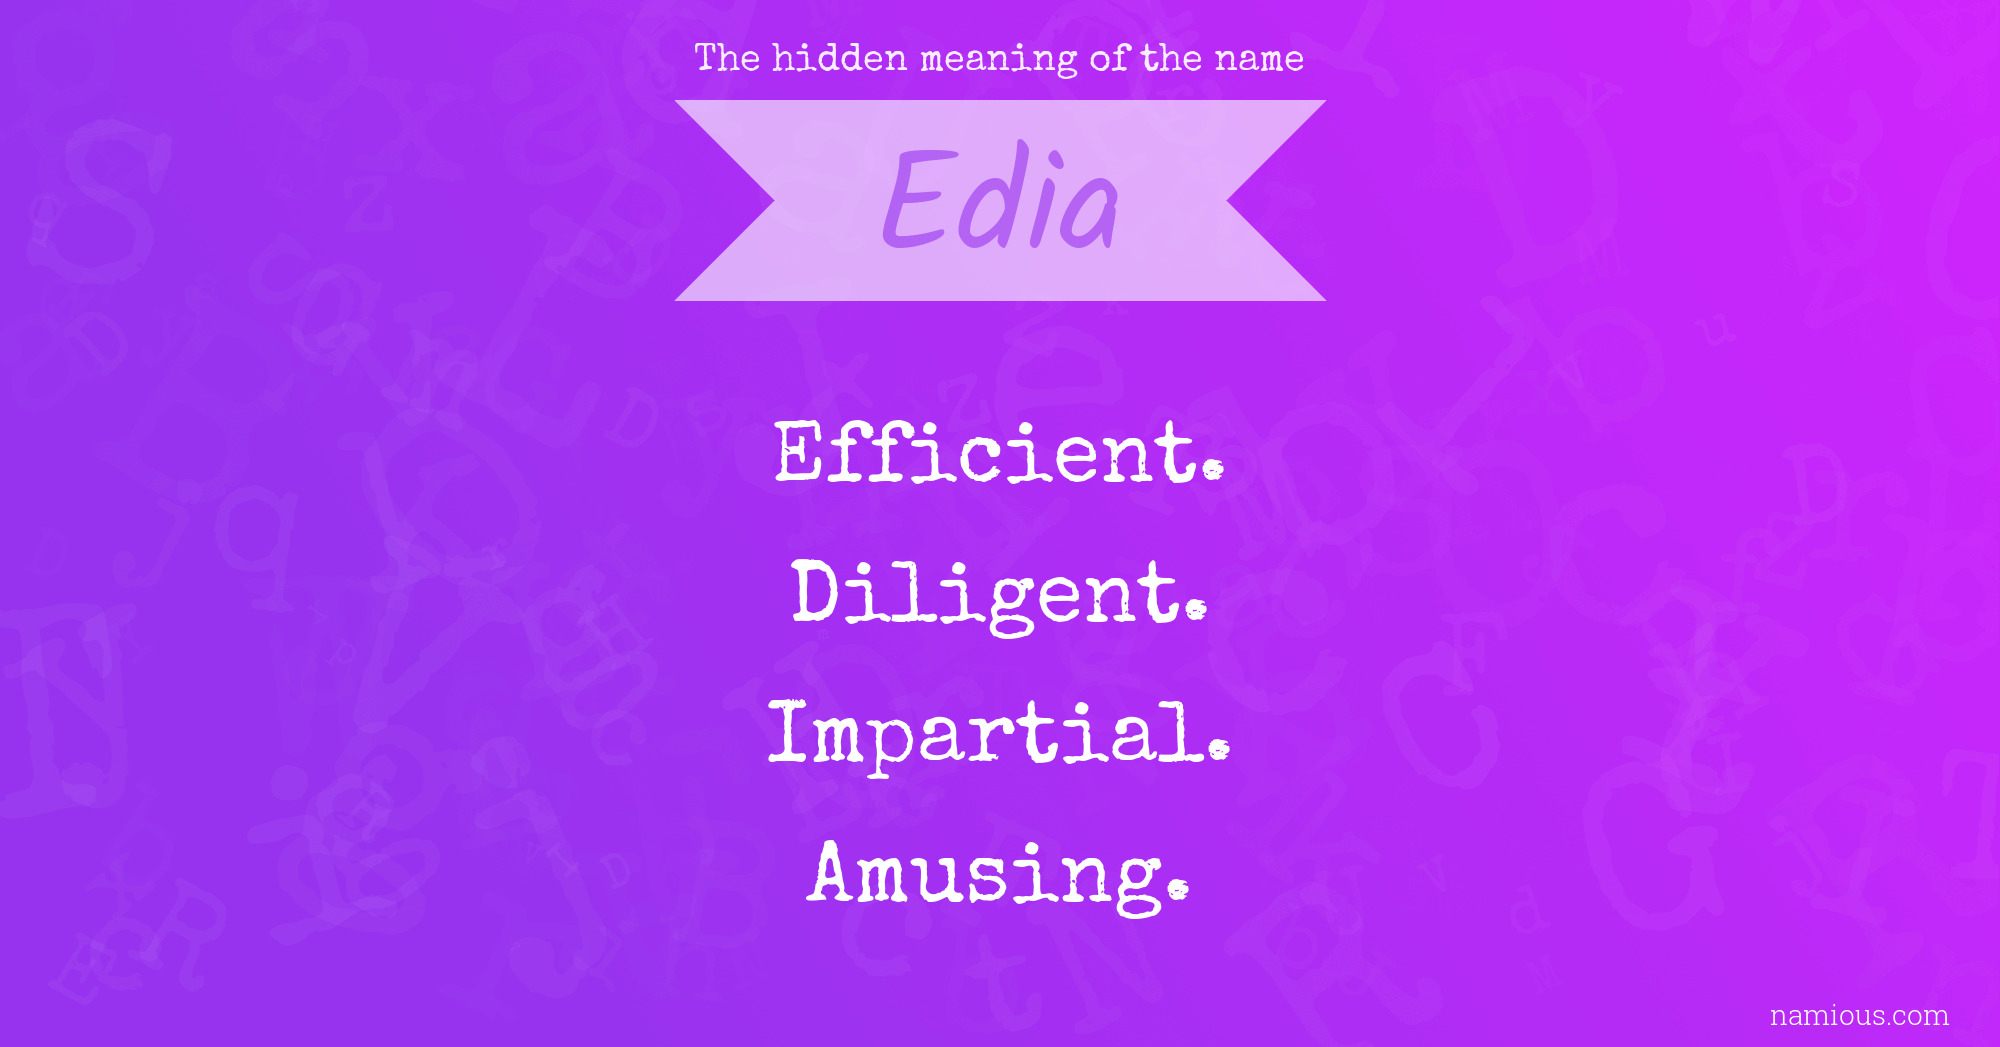 The hidden meaning of the name Edia